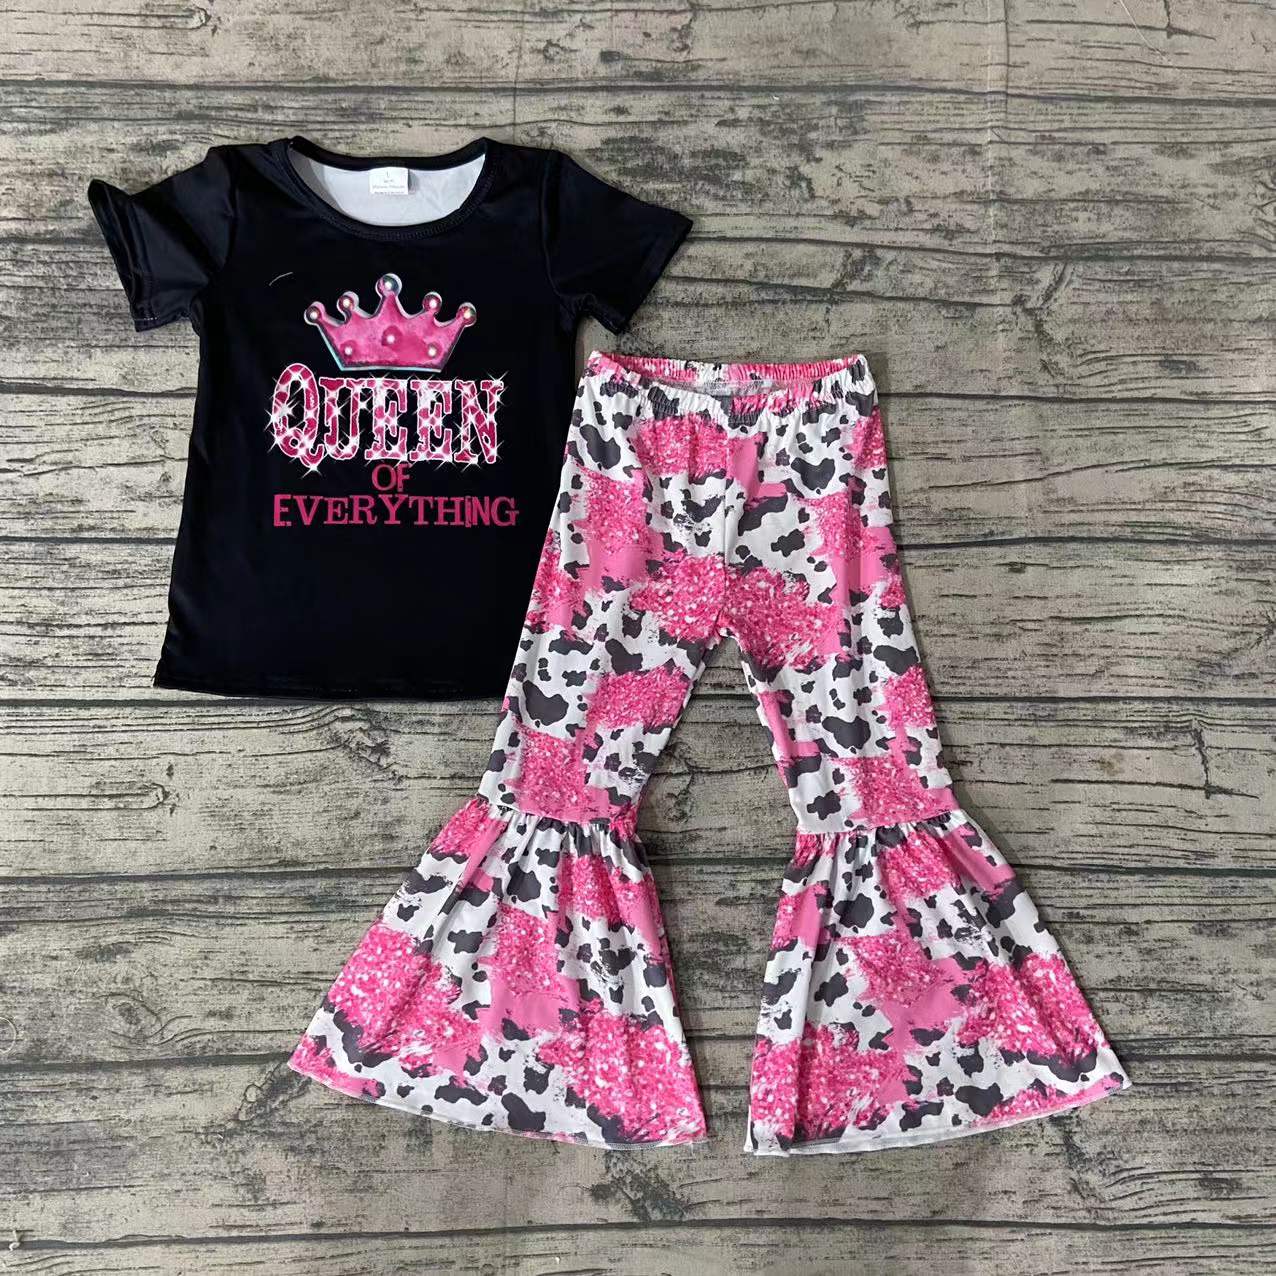 Baby Girls pink black queen of everything bell pants sets